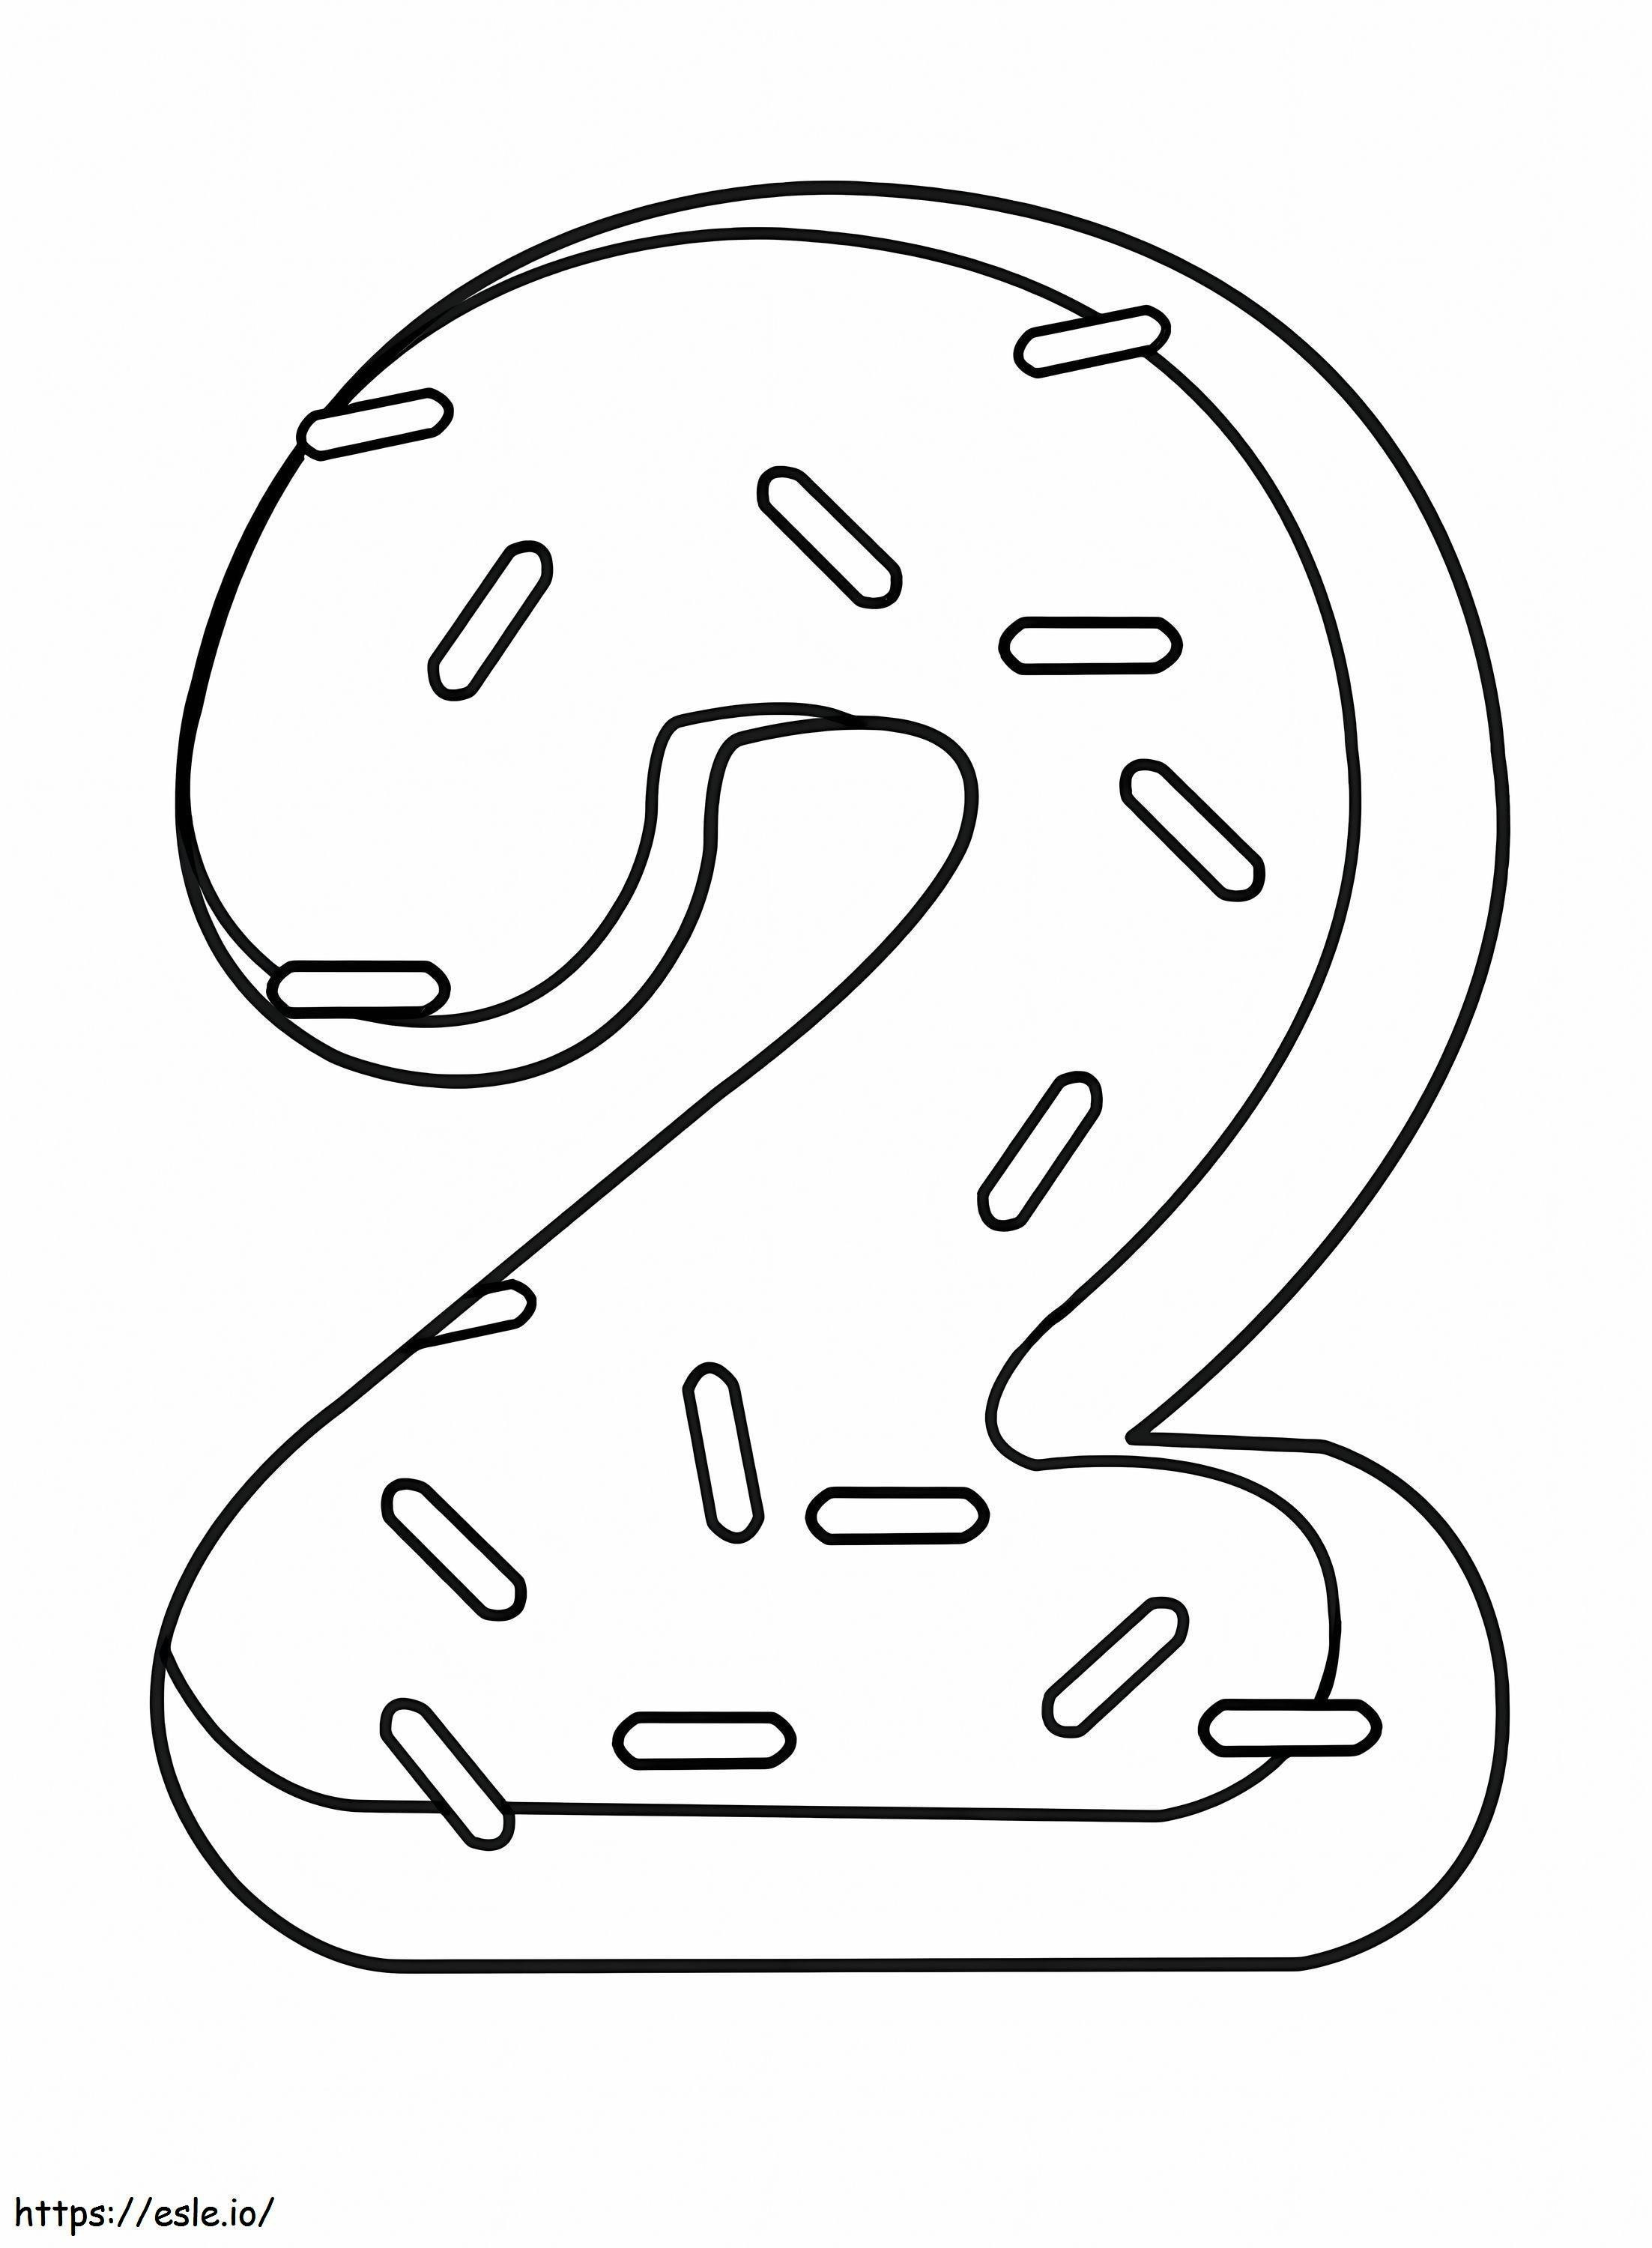 Pastel Number 2 coloring page